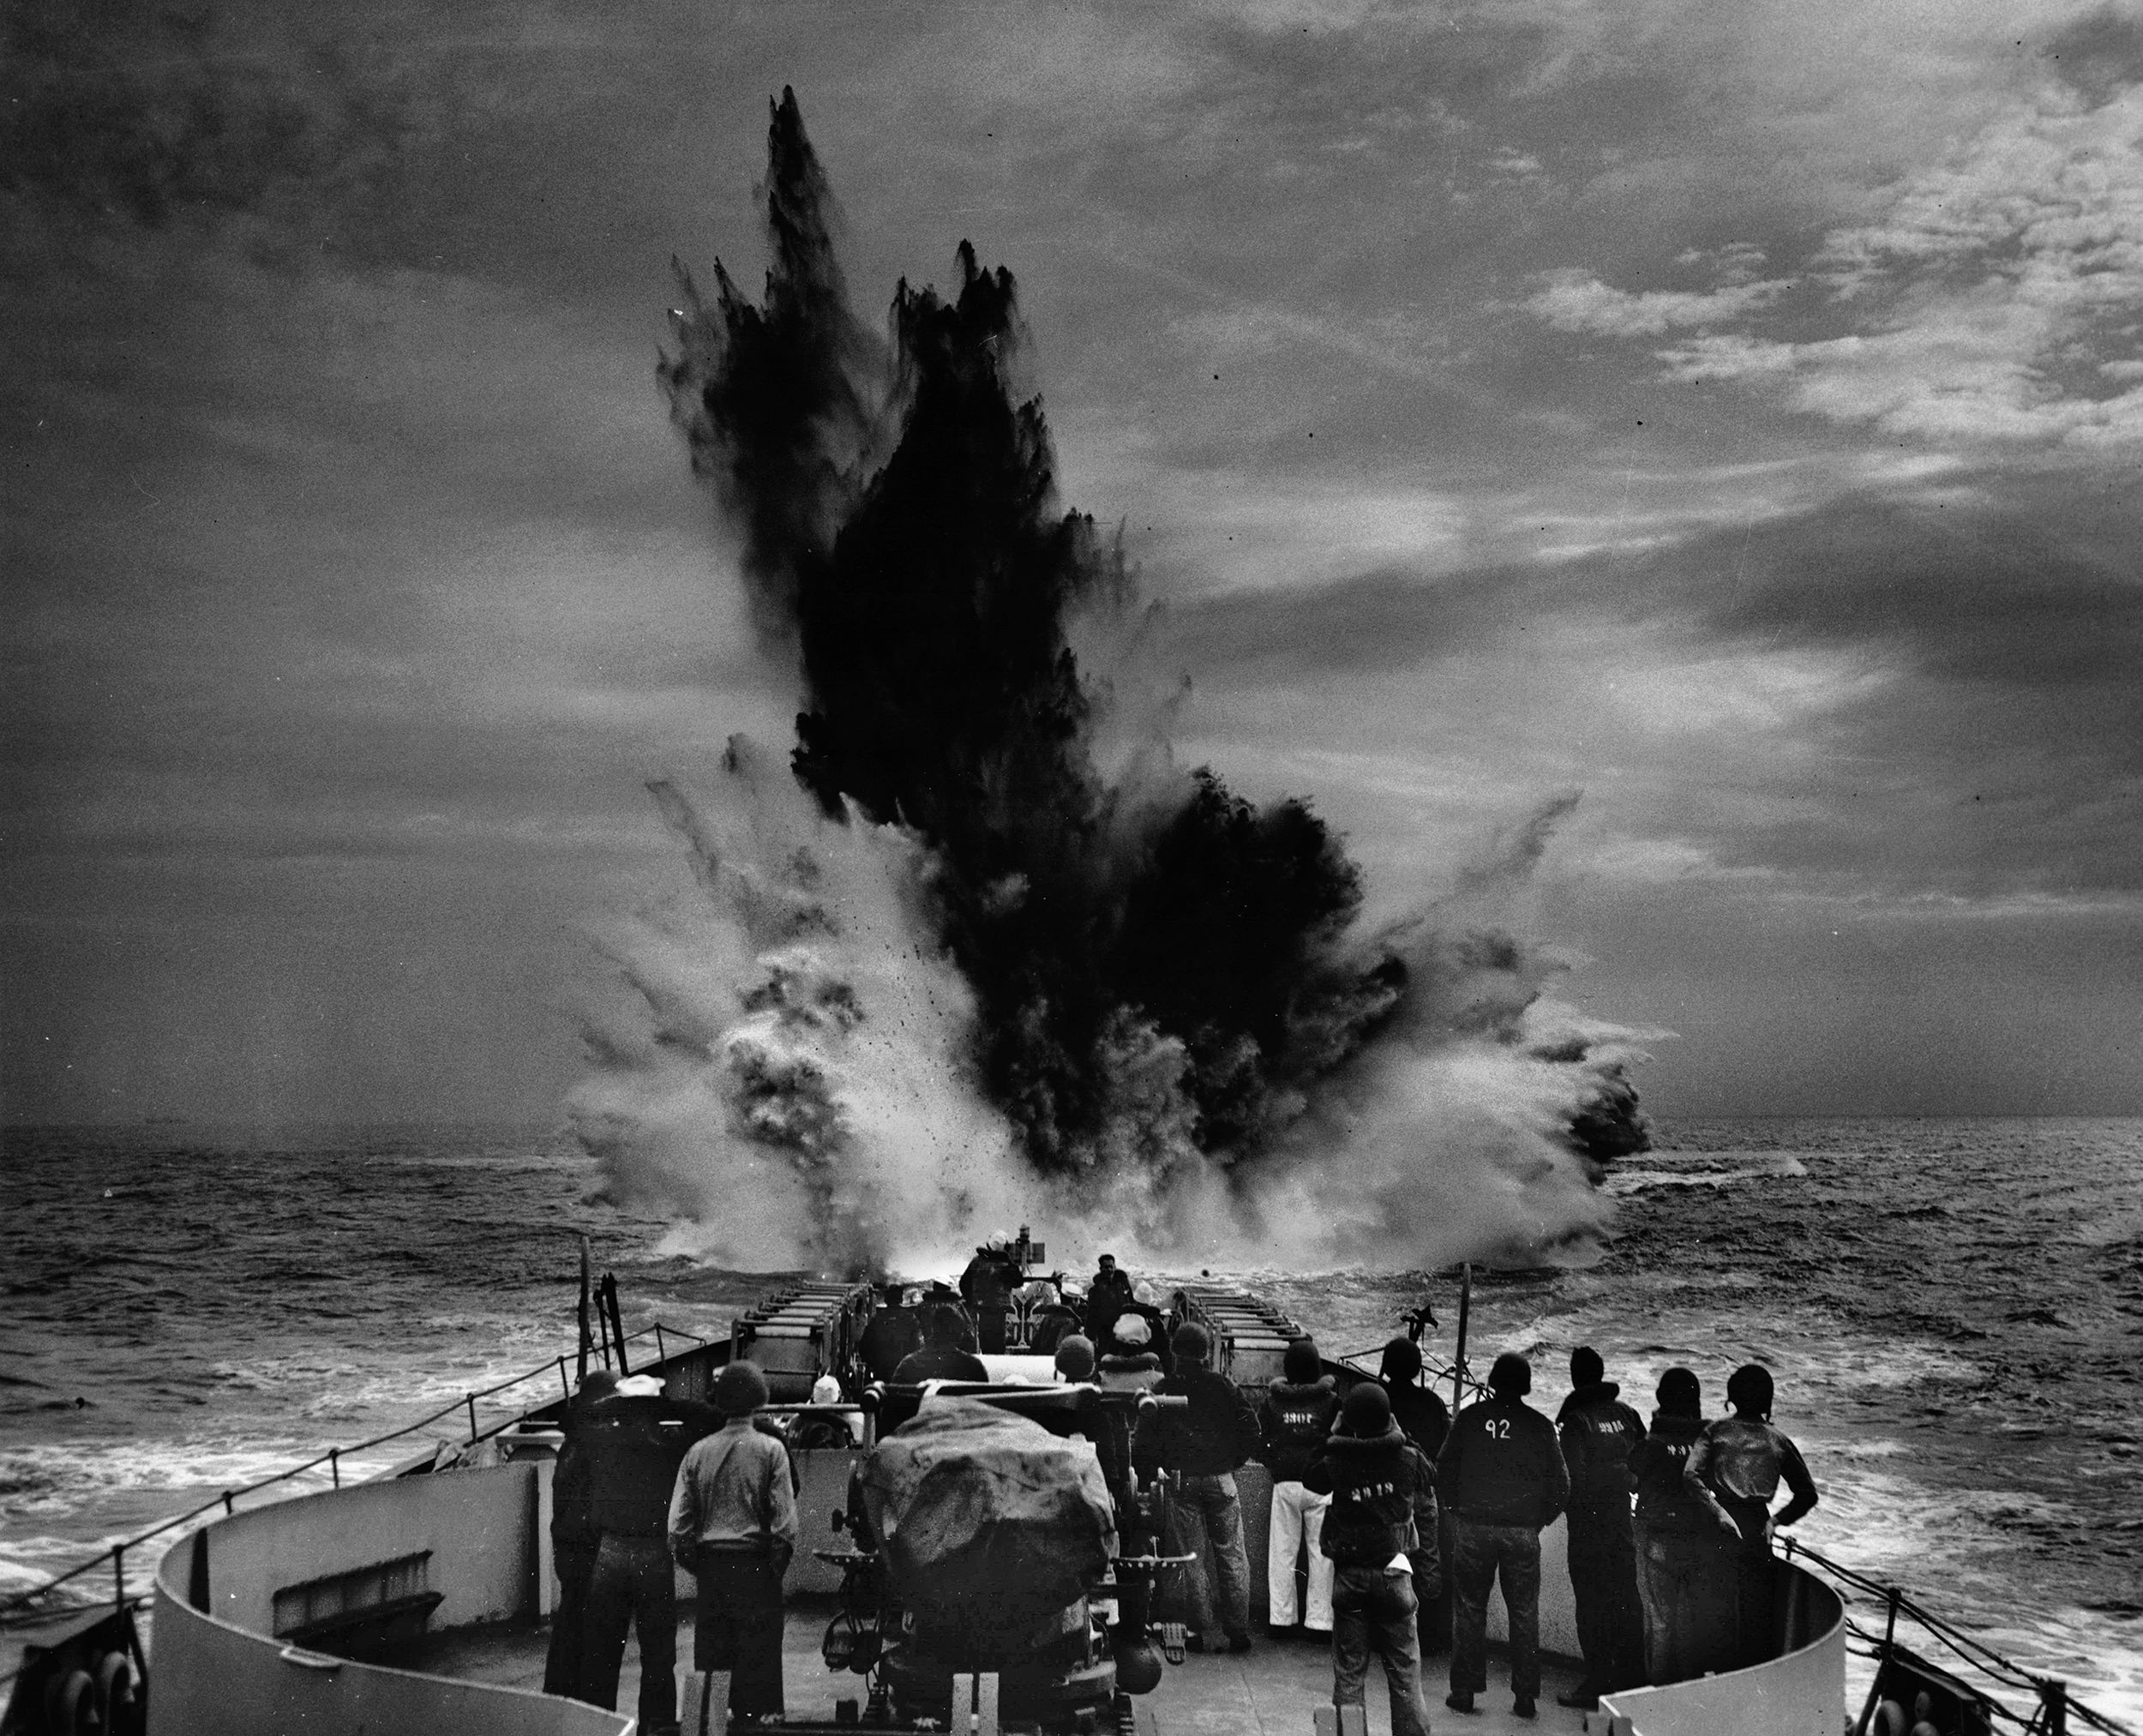 A depth charge explodes beyond the stern of a Coast Guard cutter in the Atlantic while crewmen watch the resulting cascade of seawater. Coast Guard cutters played a key role in the fight against German U-boats.